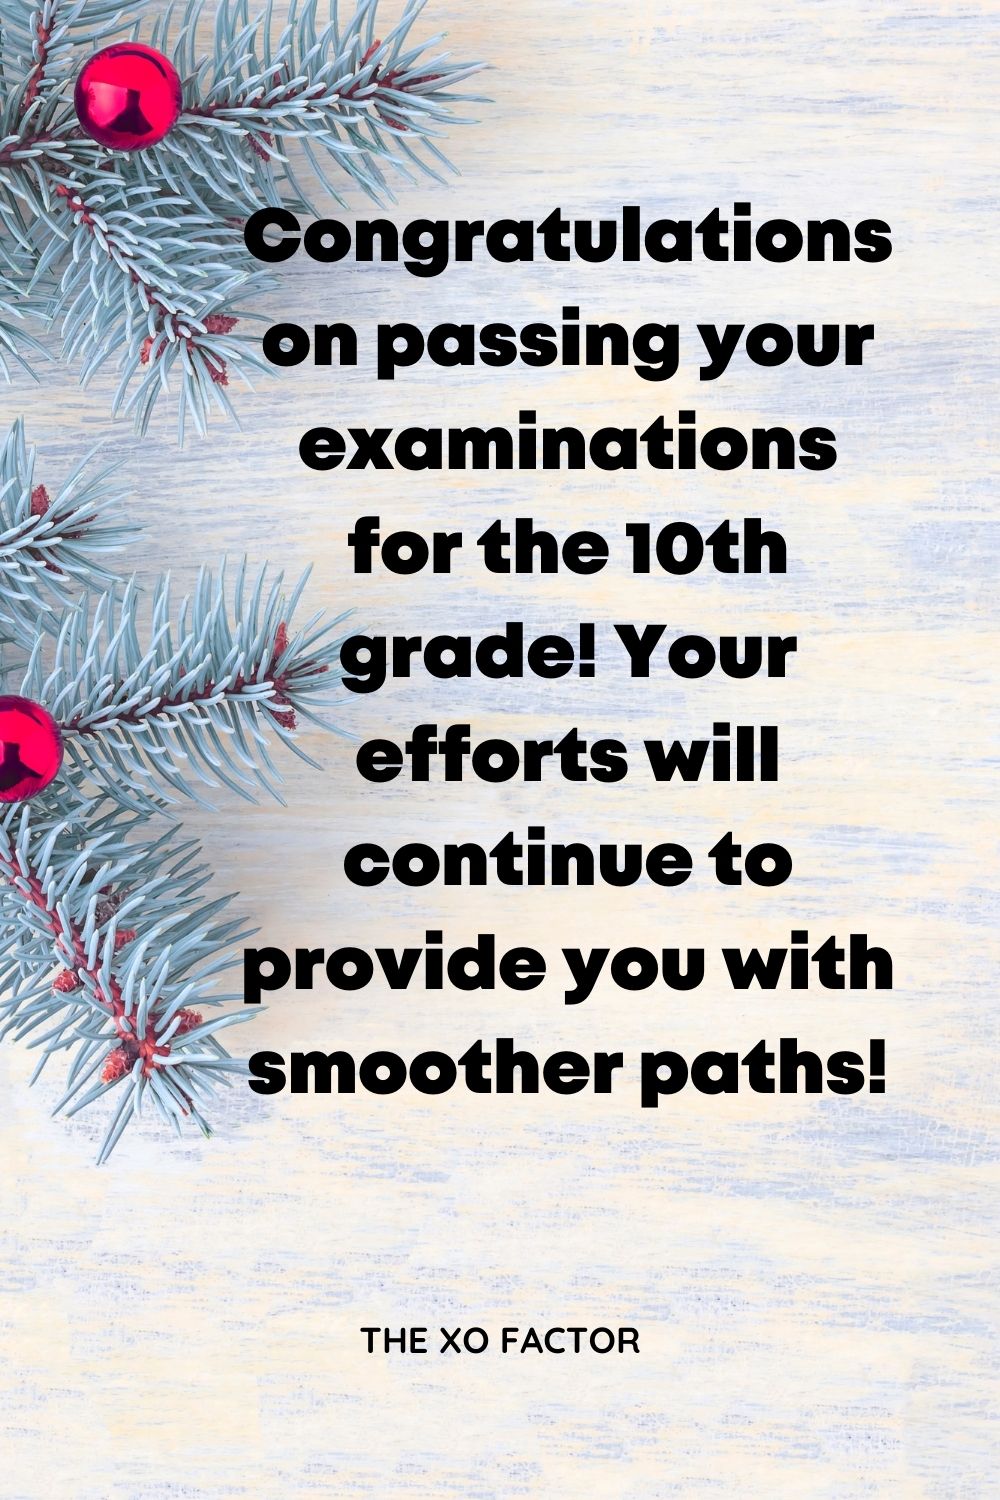 Congratulations on passing your examinations for the 10th grade! Your efforts will continue to provide you with smoother paths!